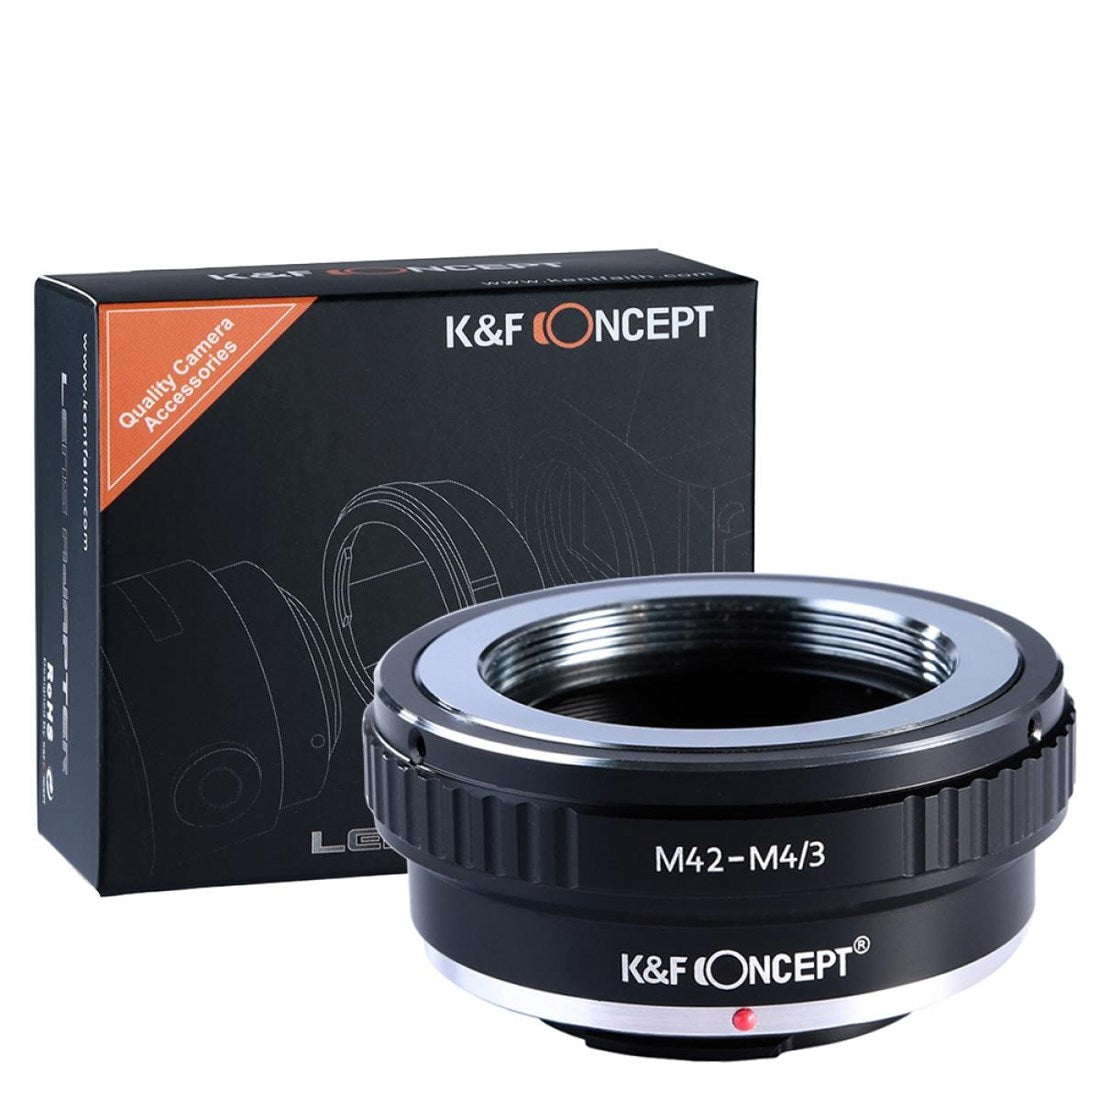 Product Image of K&F Concept M42 Lenses to M43 MFT Lens Mount Adapter